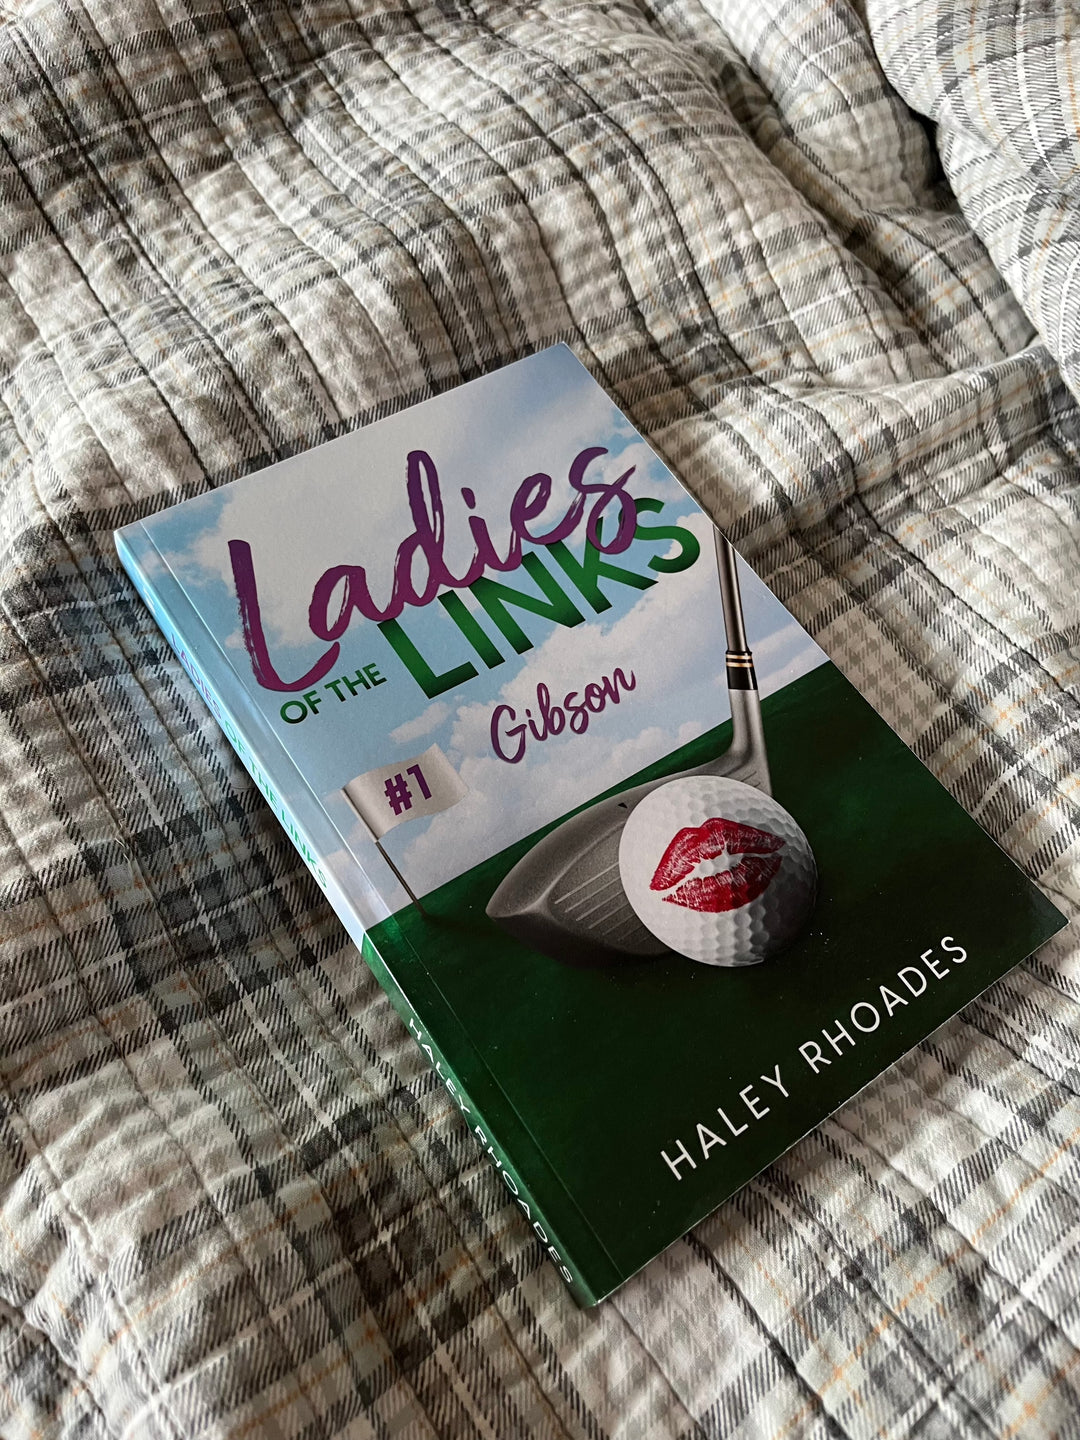 Ladies of the Links #1 Gibson